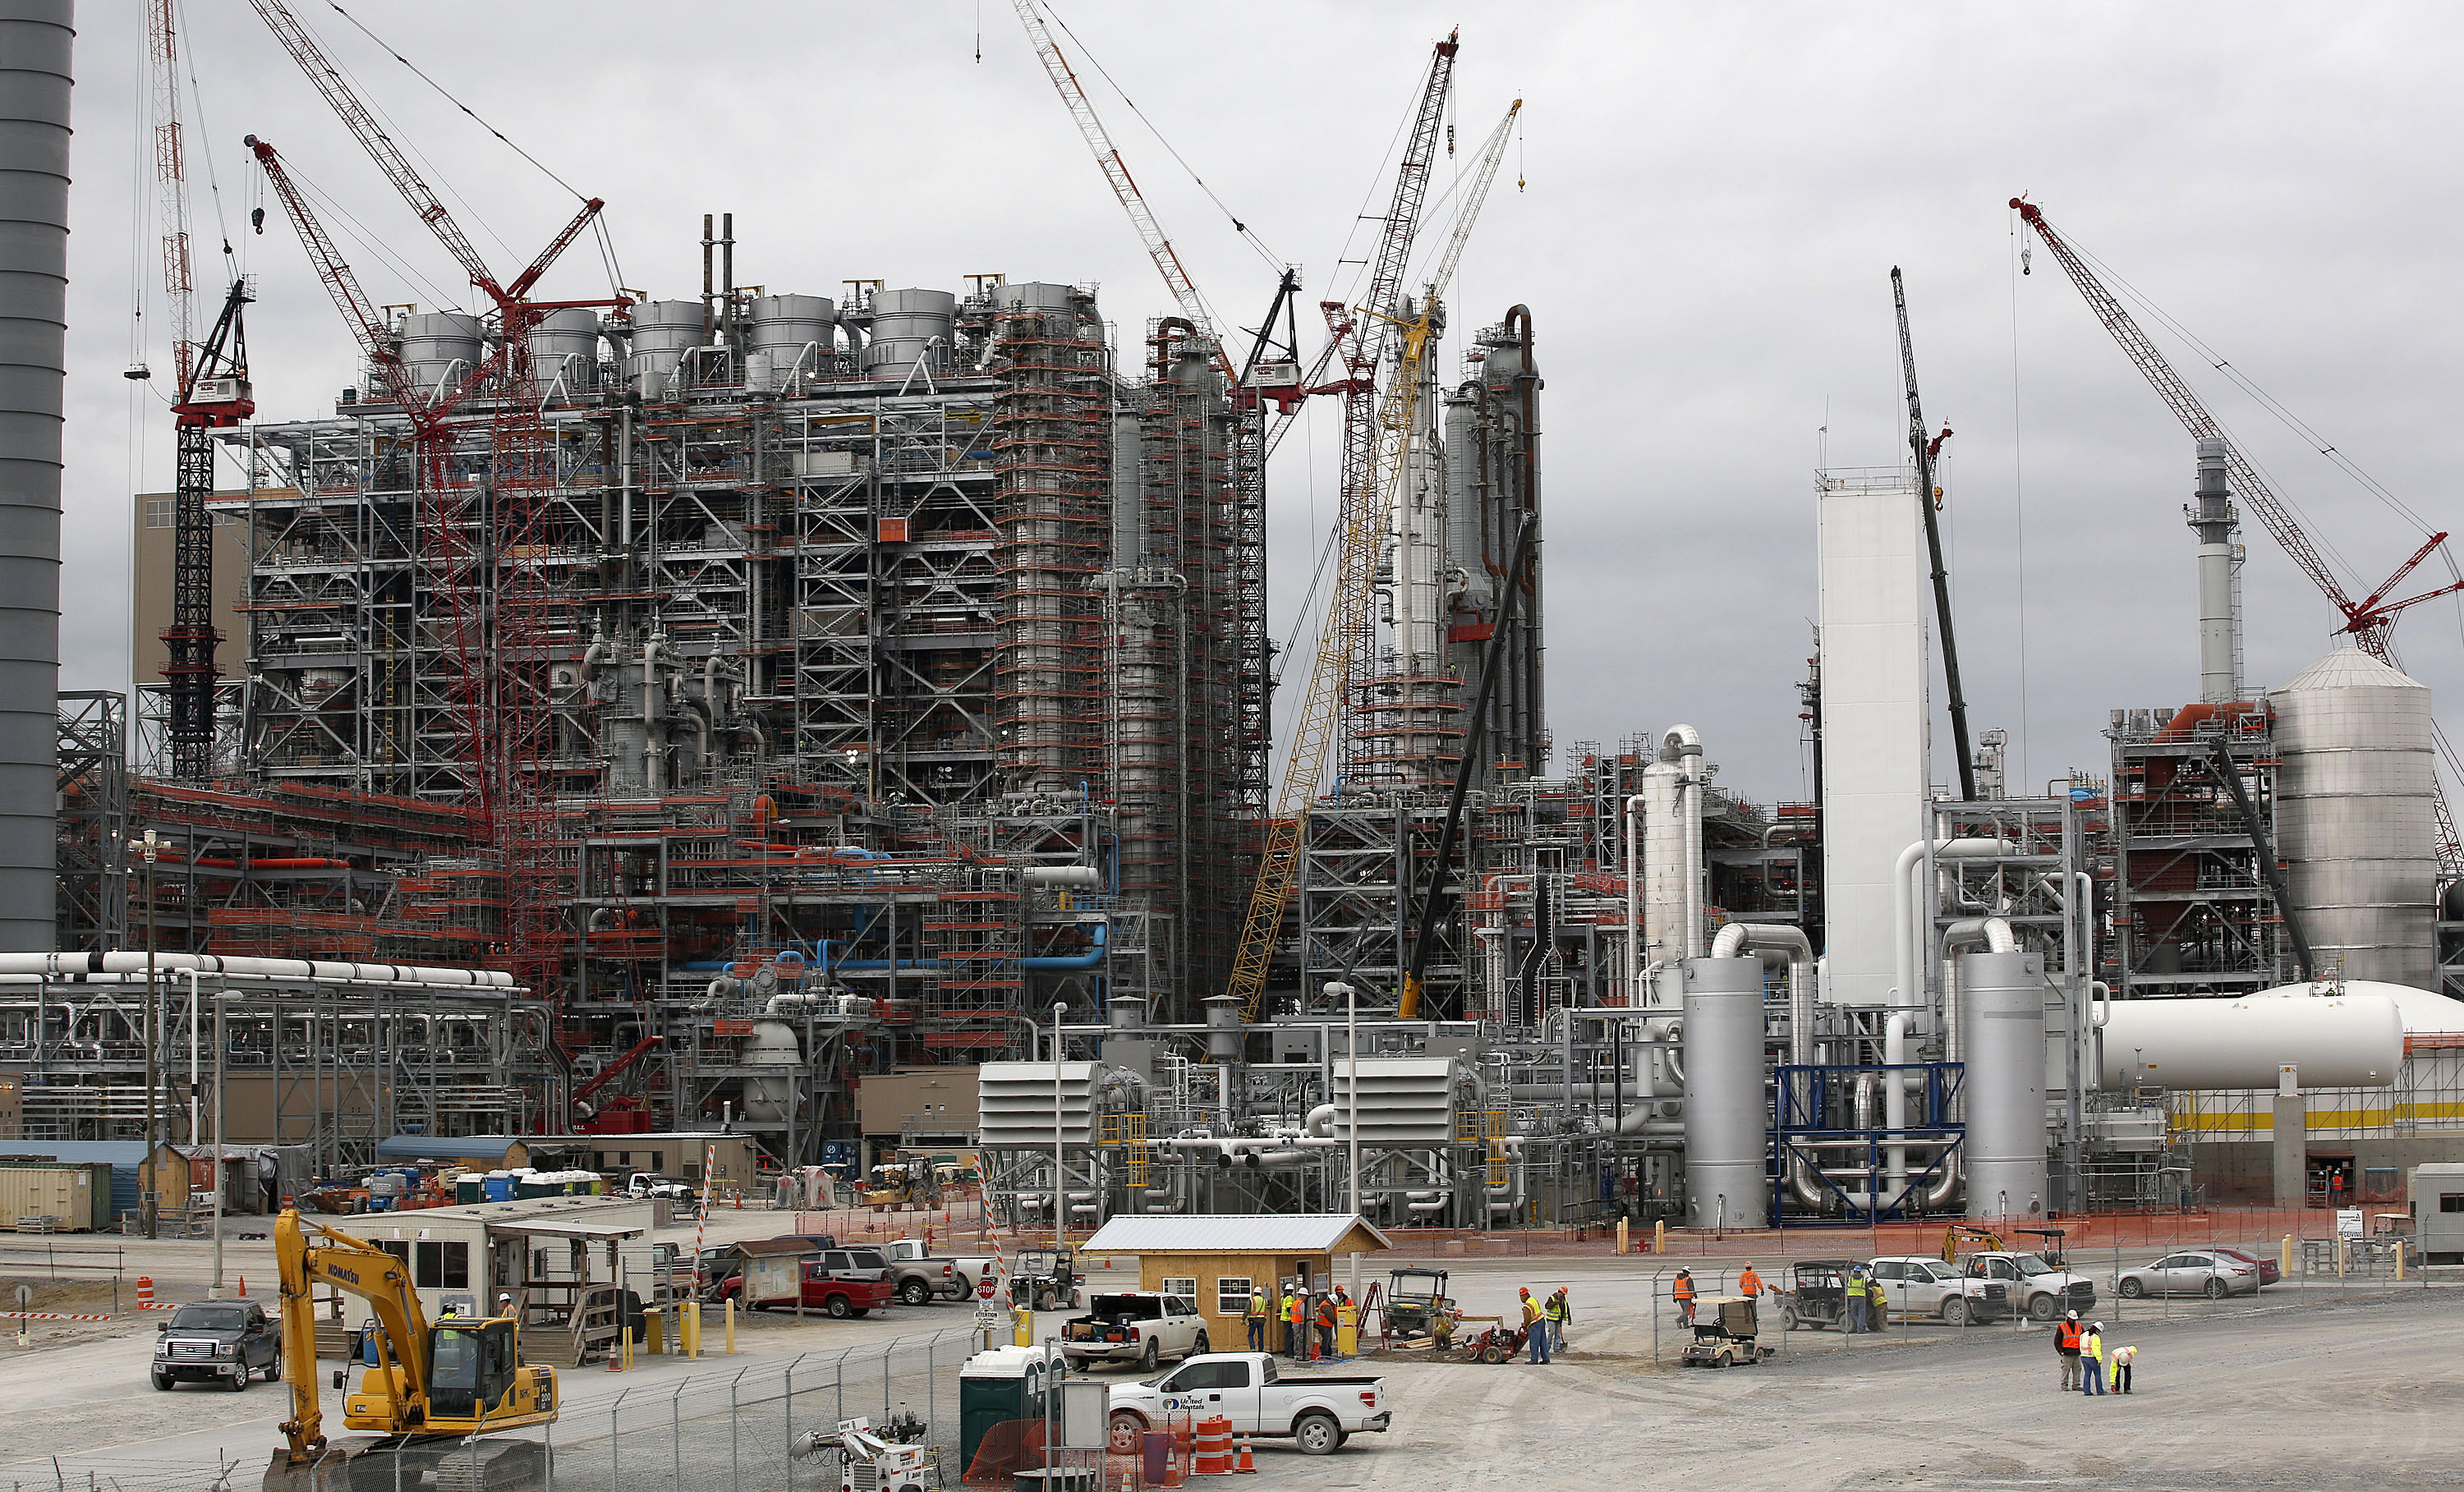 Cranes stand at the construction site for Southern Co.'s Kemper County power plant near Meridian, Mississippi, U.S., on Feb. 25, 2014. (Bloomberg—Bloomberg via Getty Images)